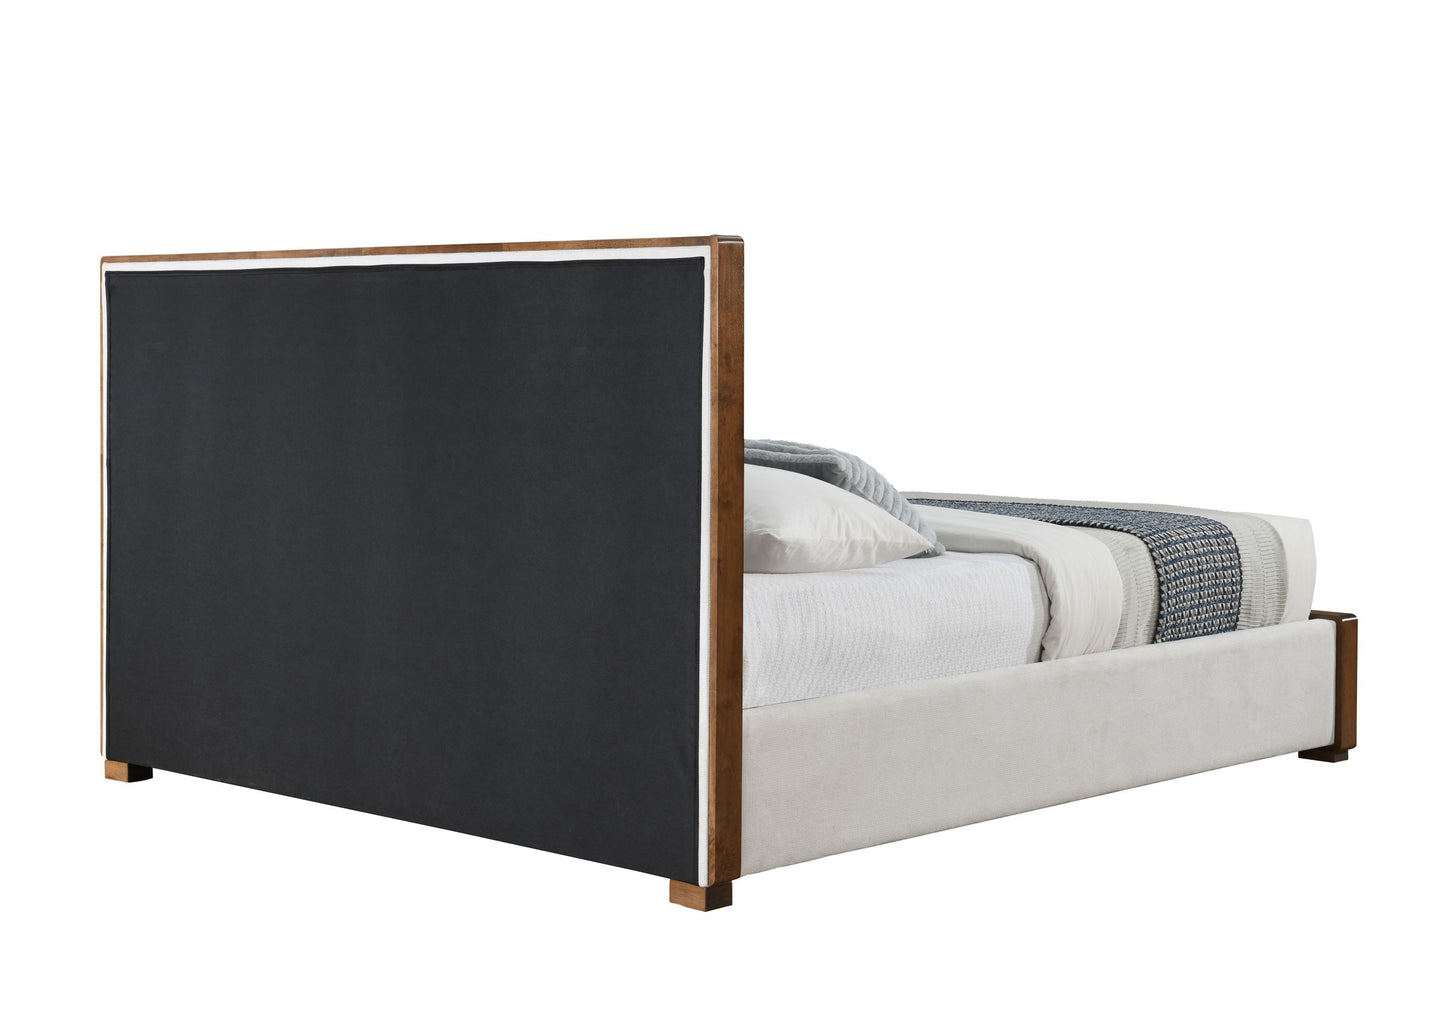 ACME Kaleea Queen Bed, Light Gray Chenille & Walnut Finish BD02468Q - Enova Luxe Home Store